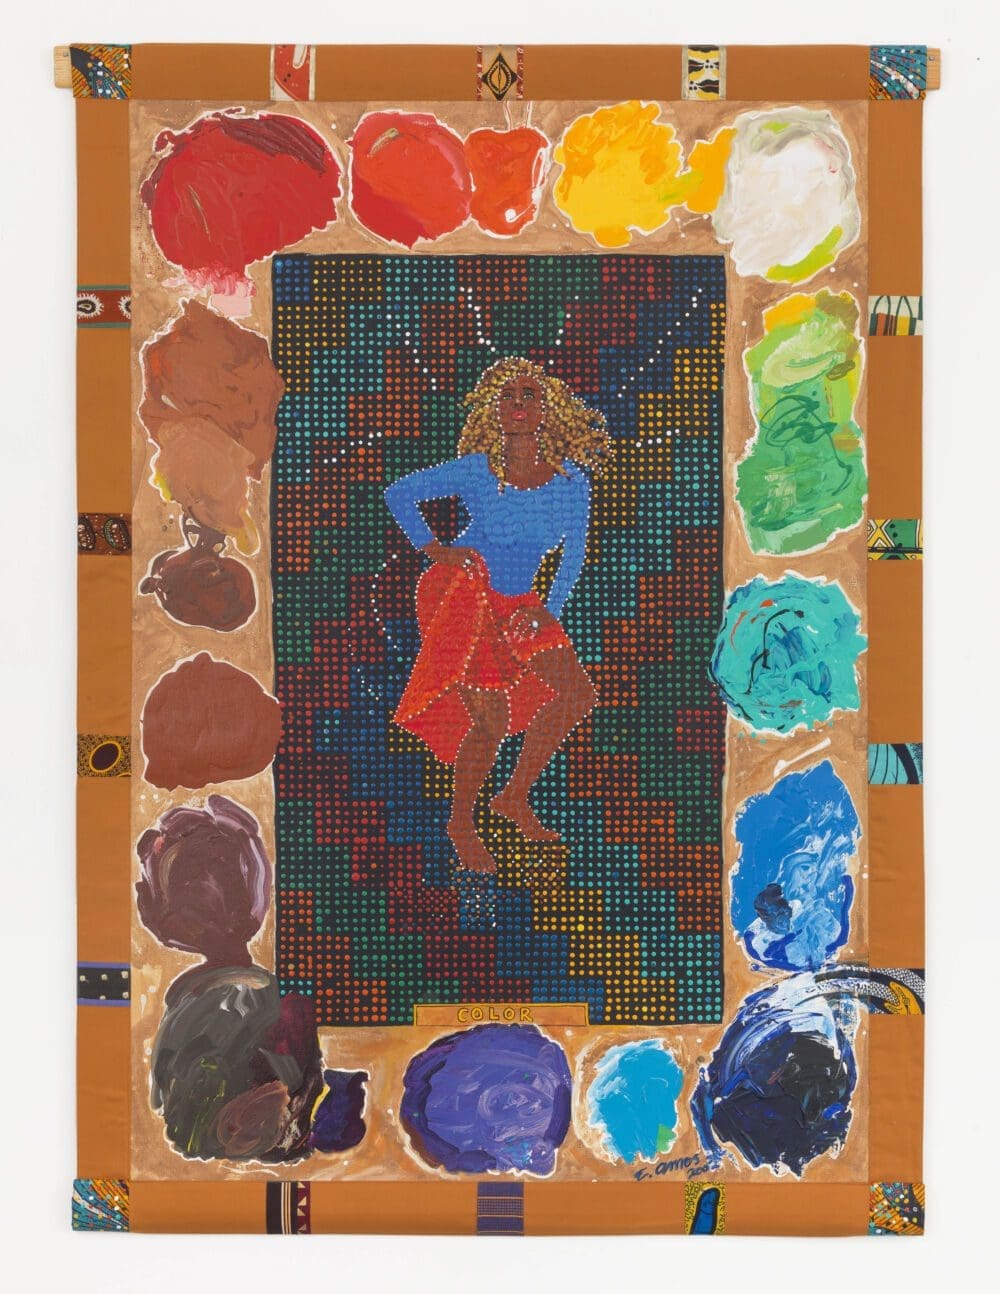 Emma Amos Color, 2002 Acrylic on canvas with African fabric borders 66 1/2 x 47 1/4 inches (168.9 x 120 cm)